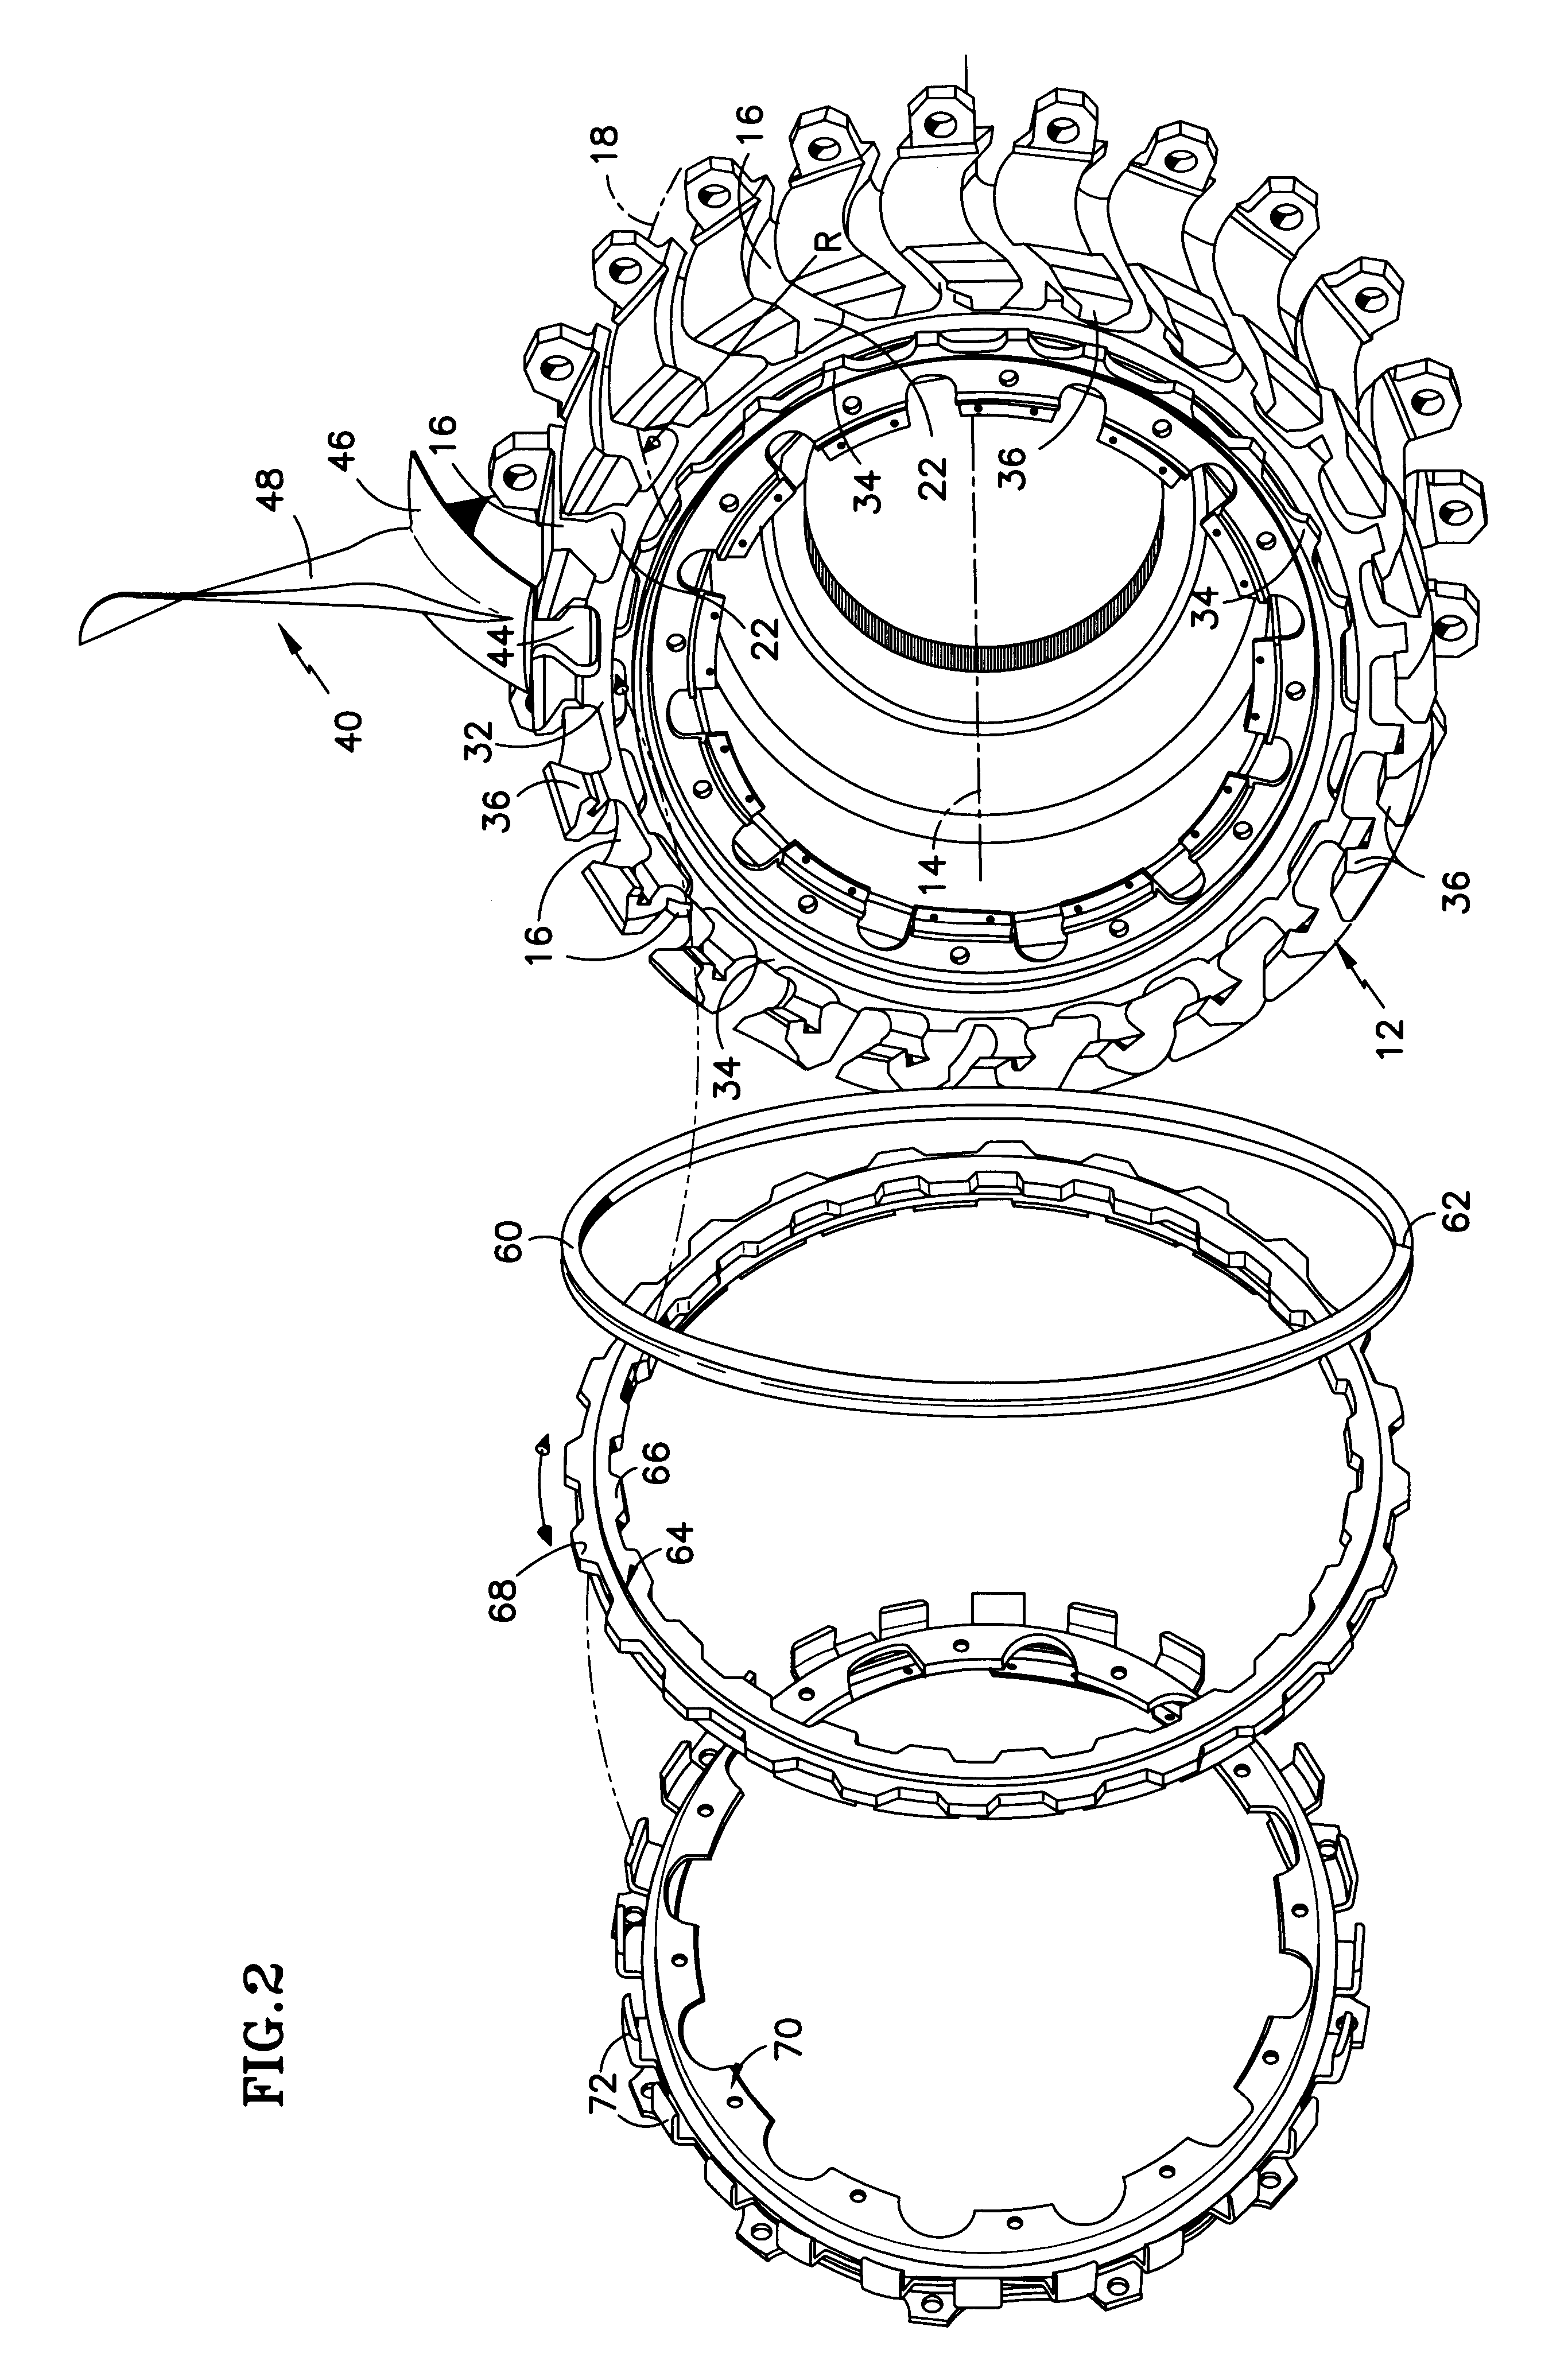 Axial retention system and components thereof for a bladed rotor